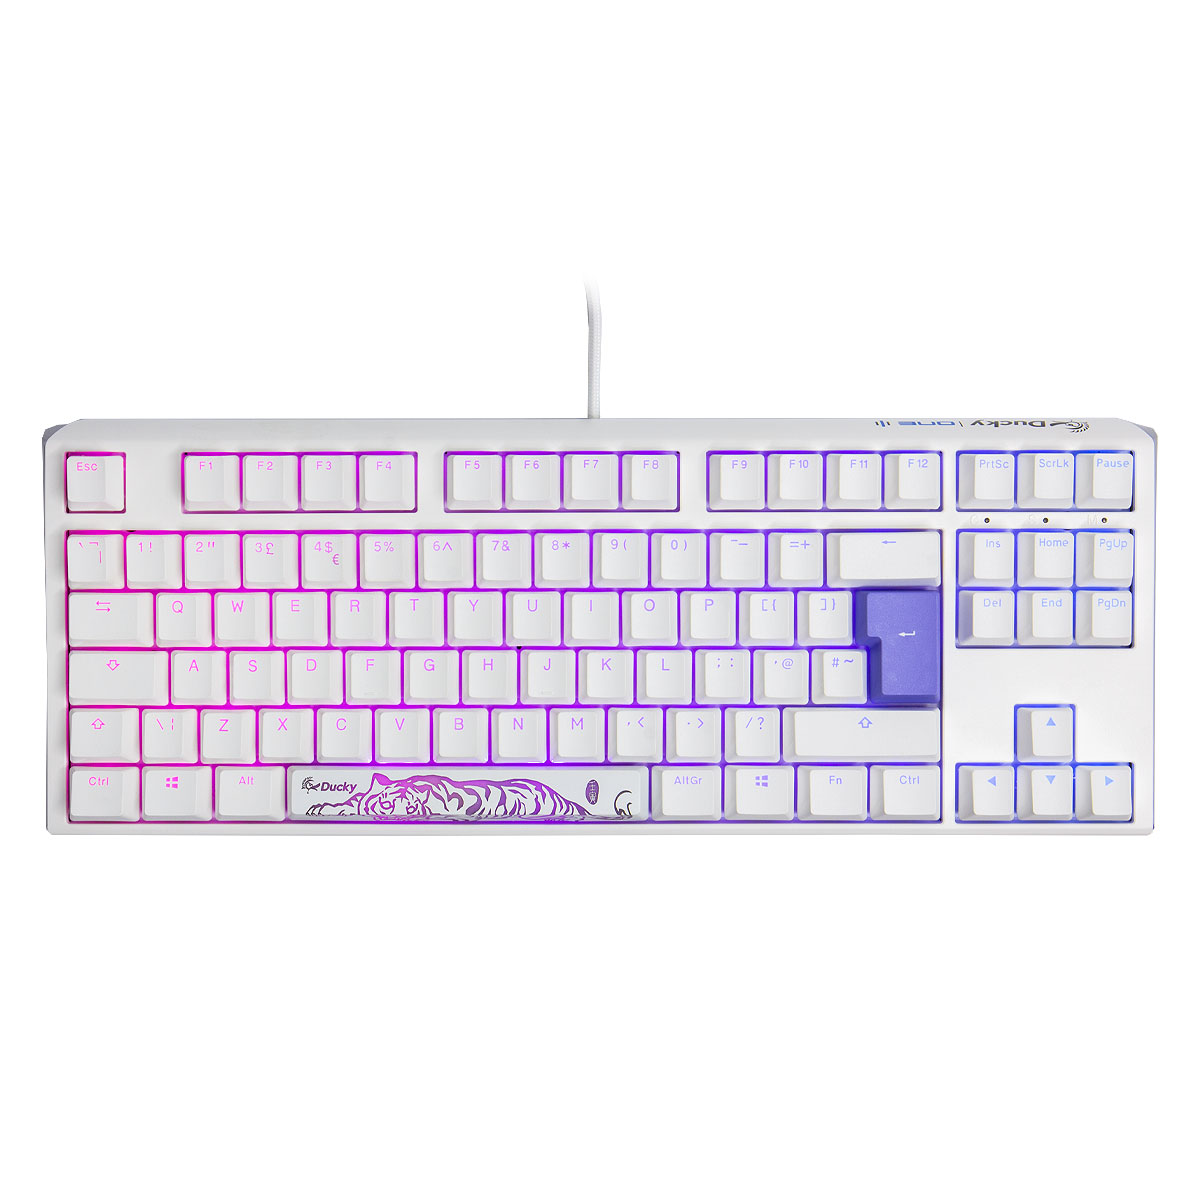 Ducky One 3 Classic TKL USB RGB Mechanical Gaming Keyboard Cherry Silver - Pure White UK Layout